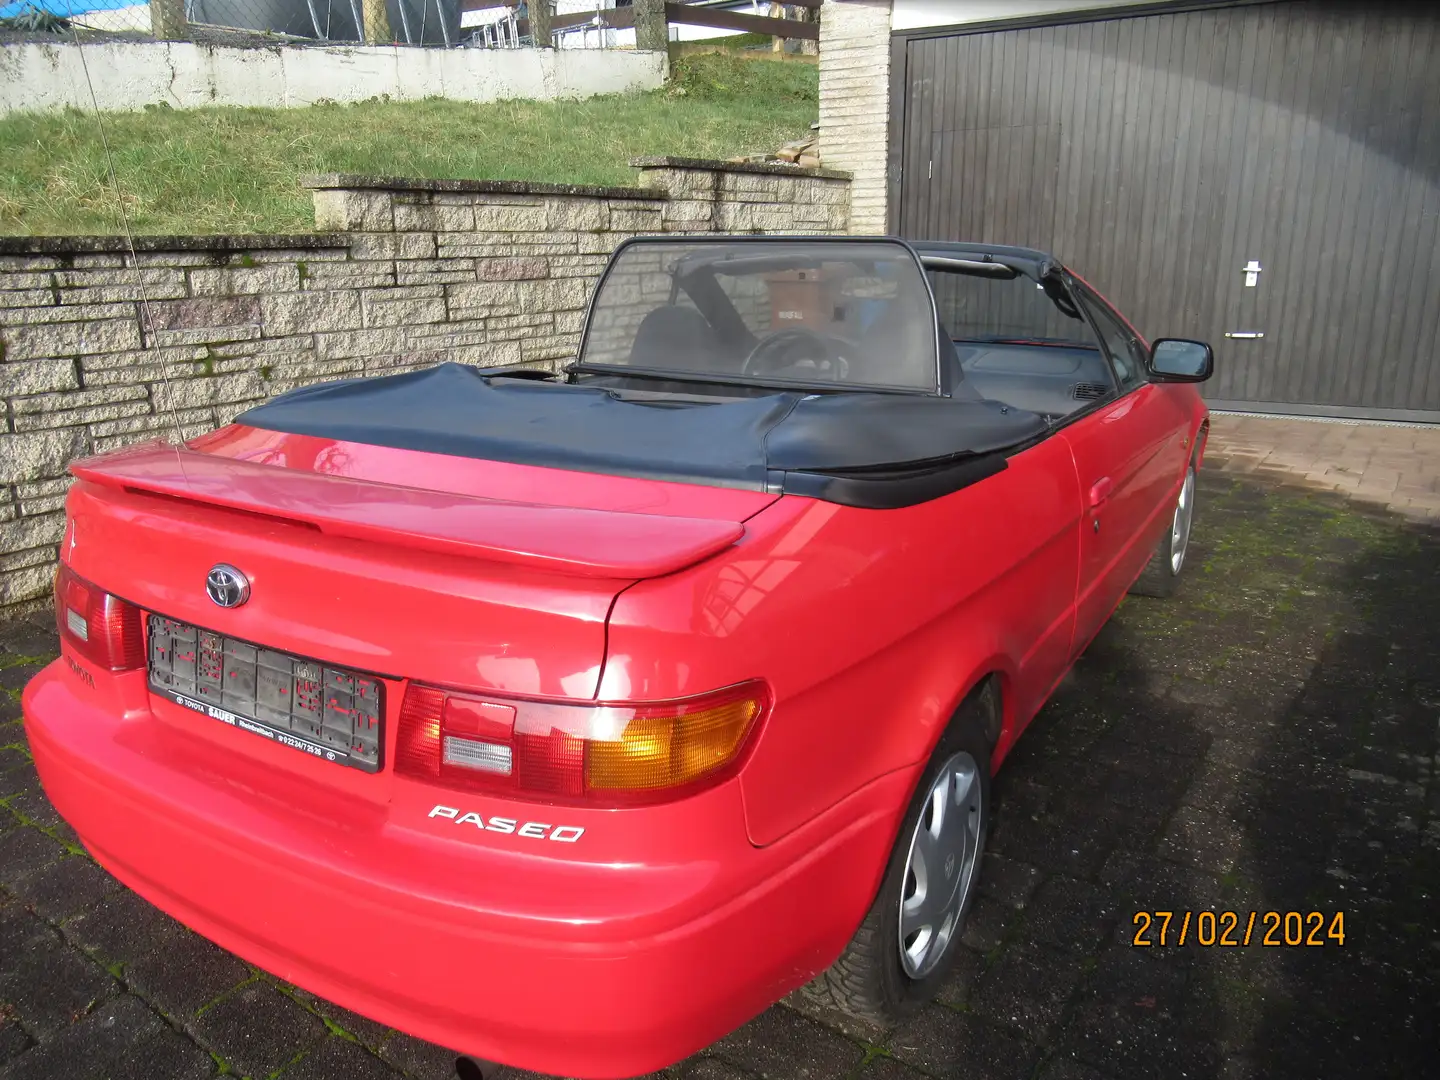 Toyota Paseo Paseo Cabriolet 1.5 Rosso - 2